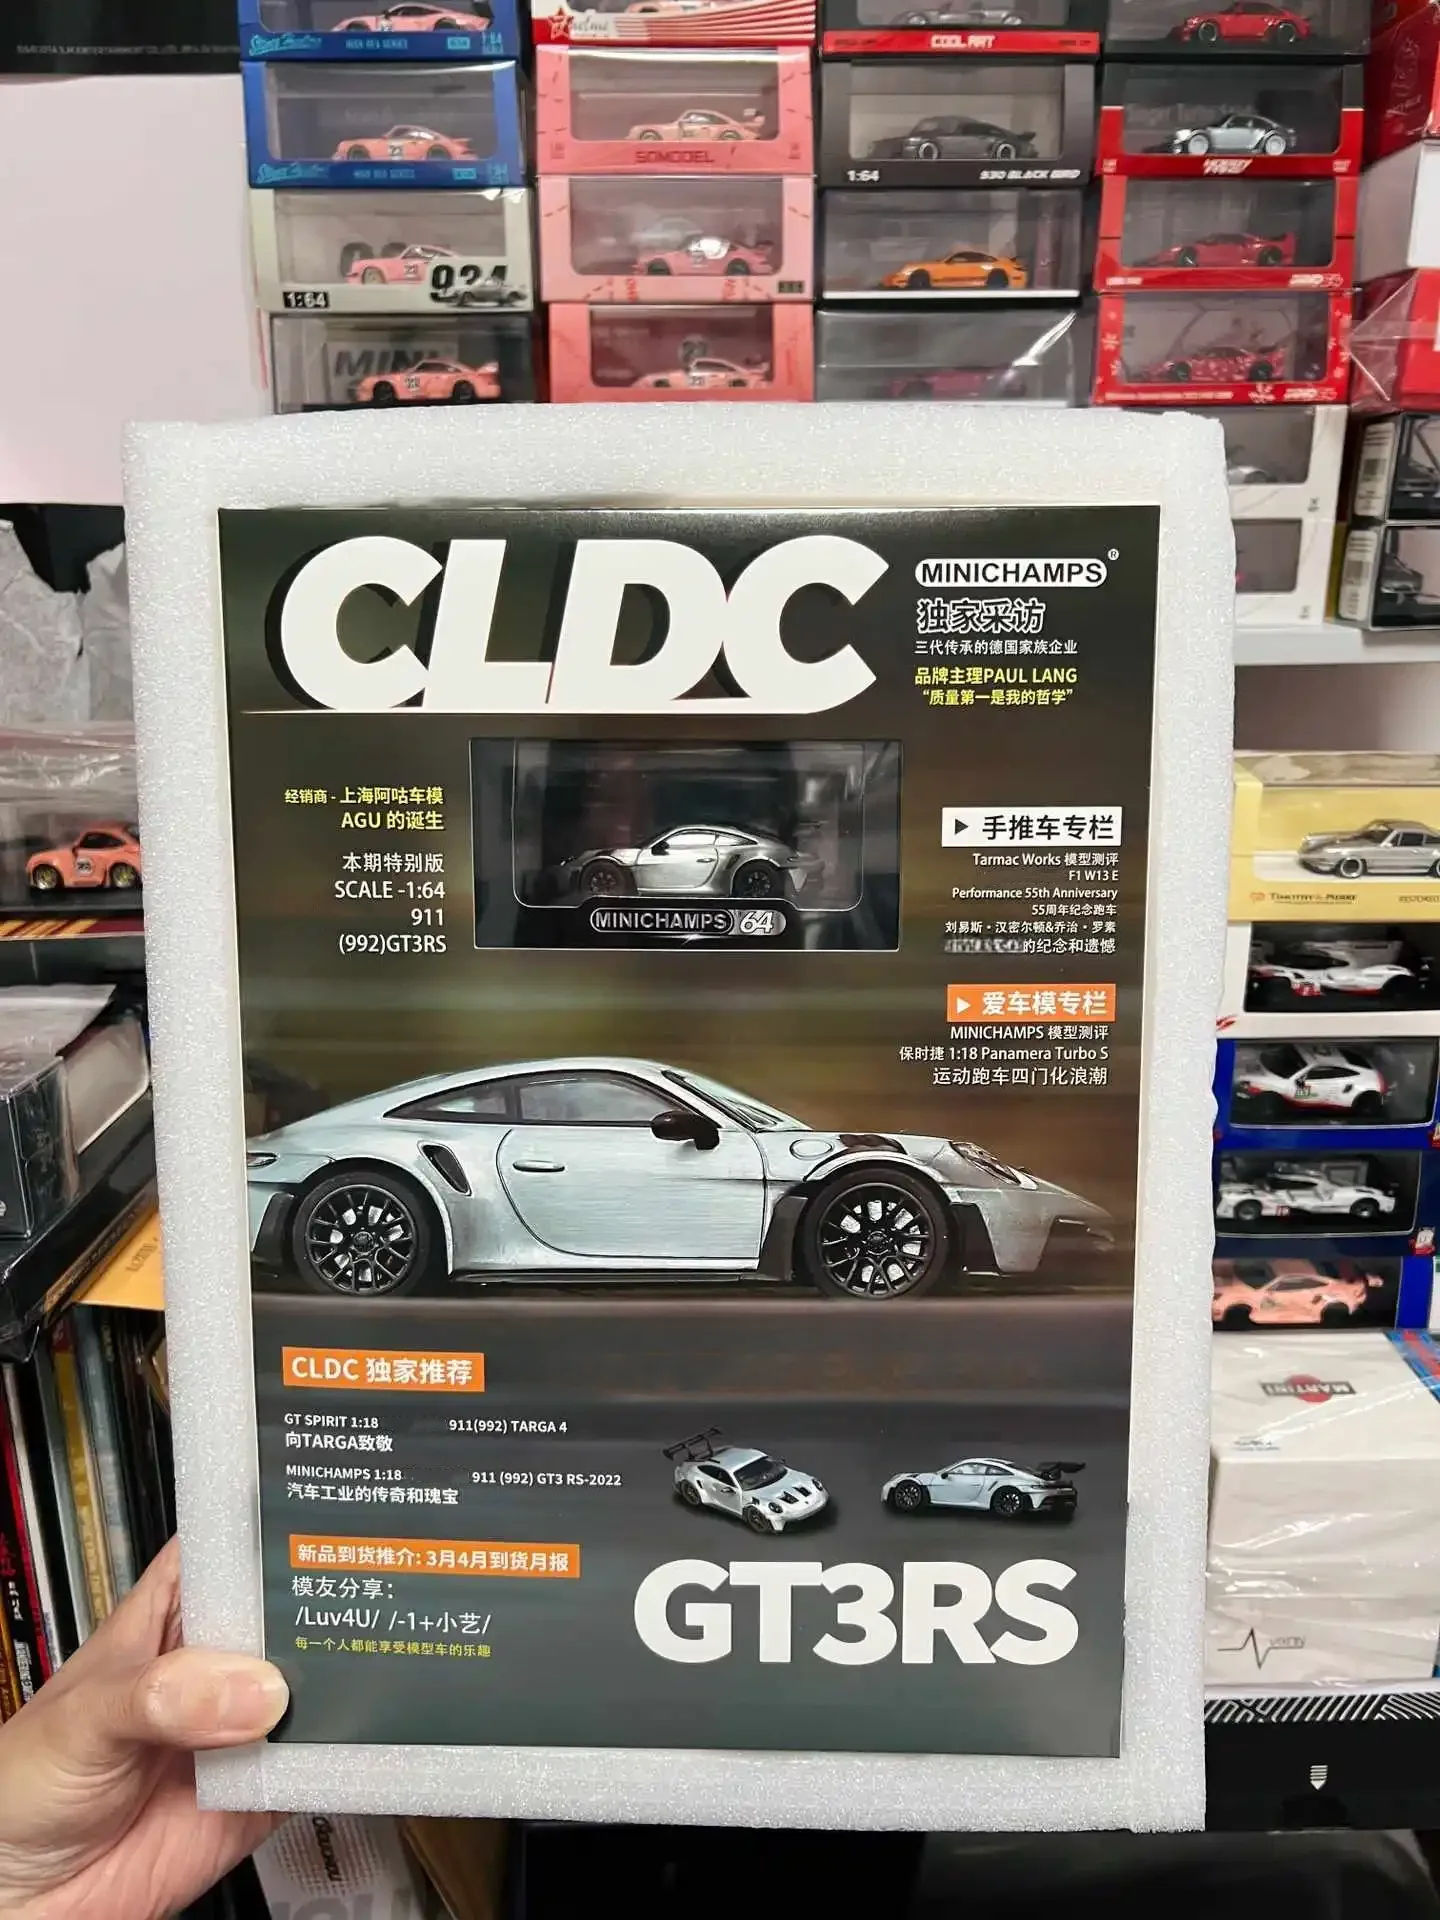 

Minichamps 1:64 DLDC 992 GT3RS Simulation Limited Edition Alloy Metal Static Car Model Toy Gift